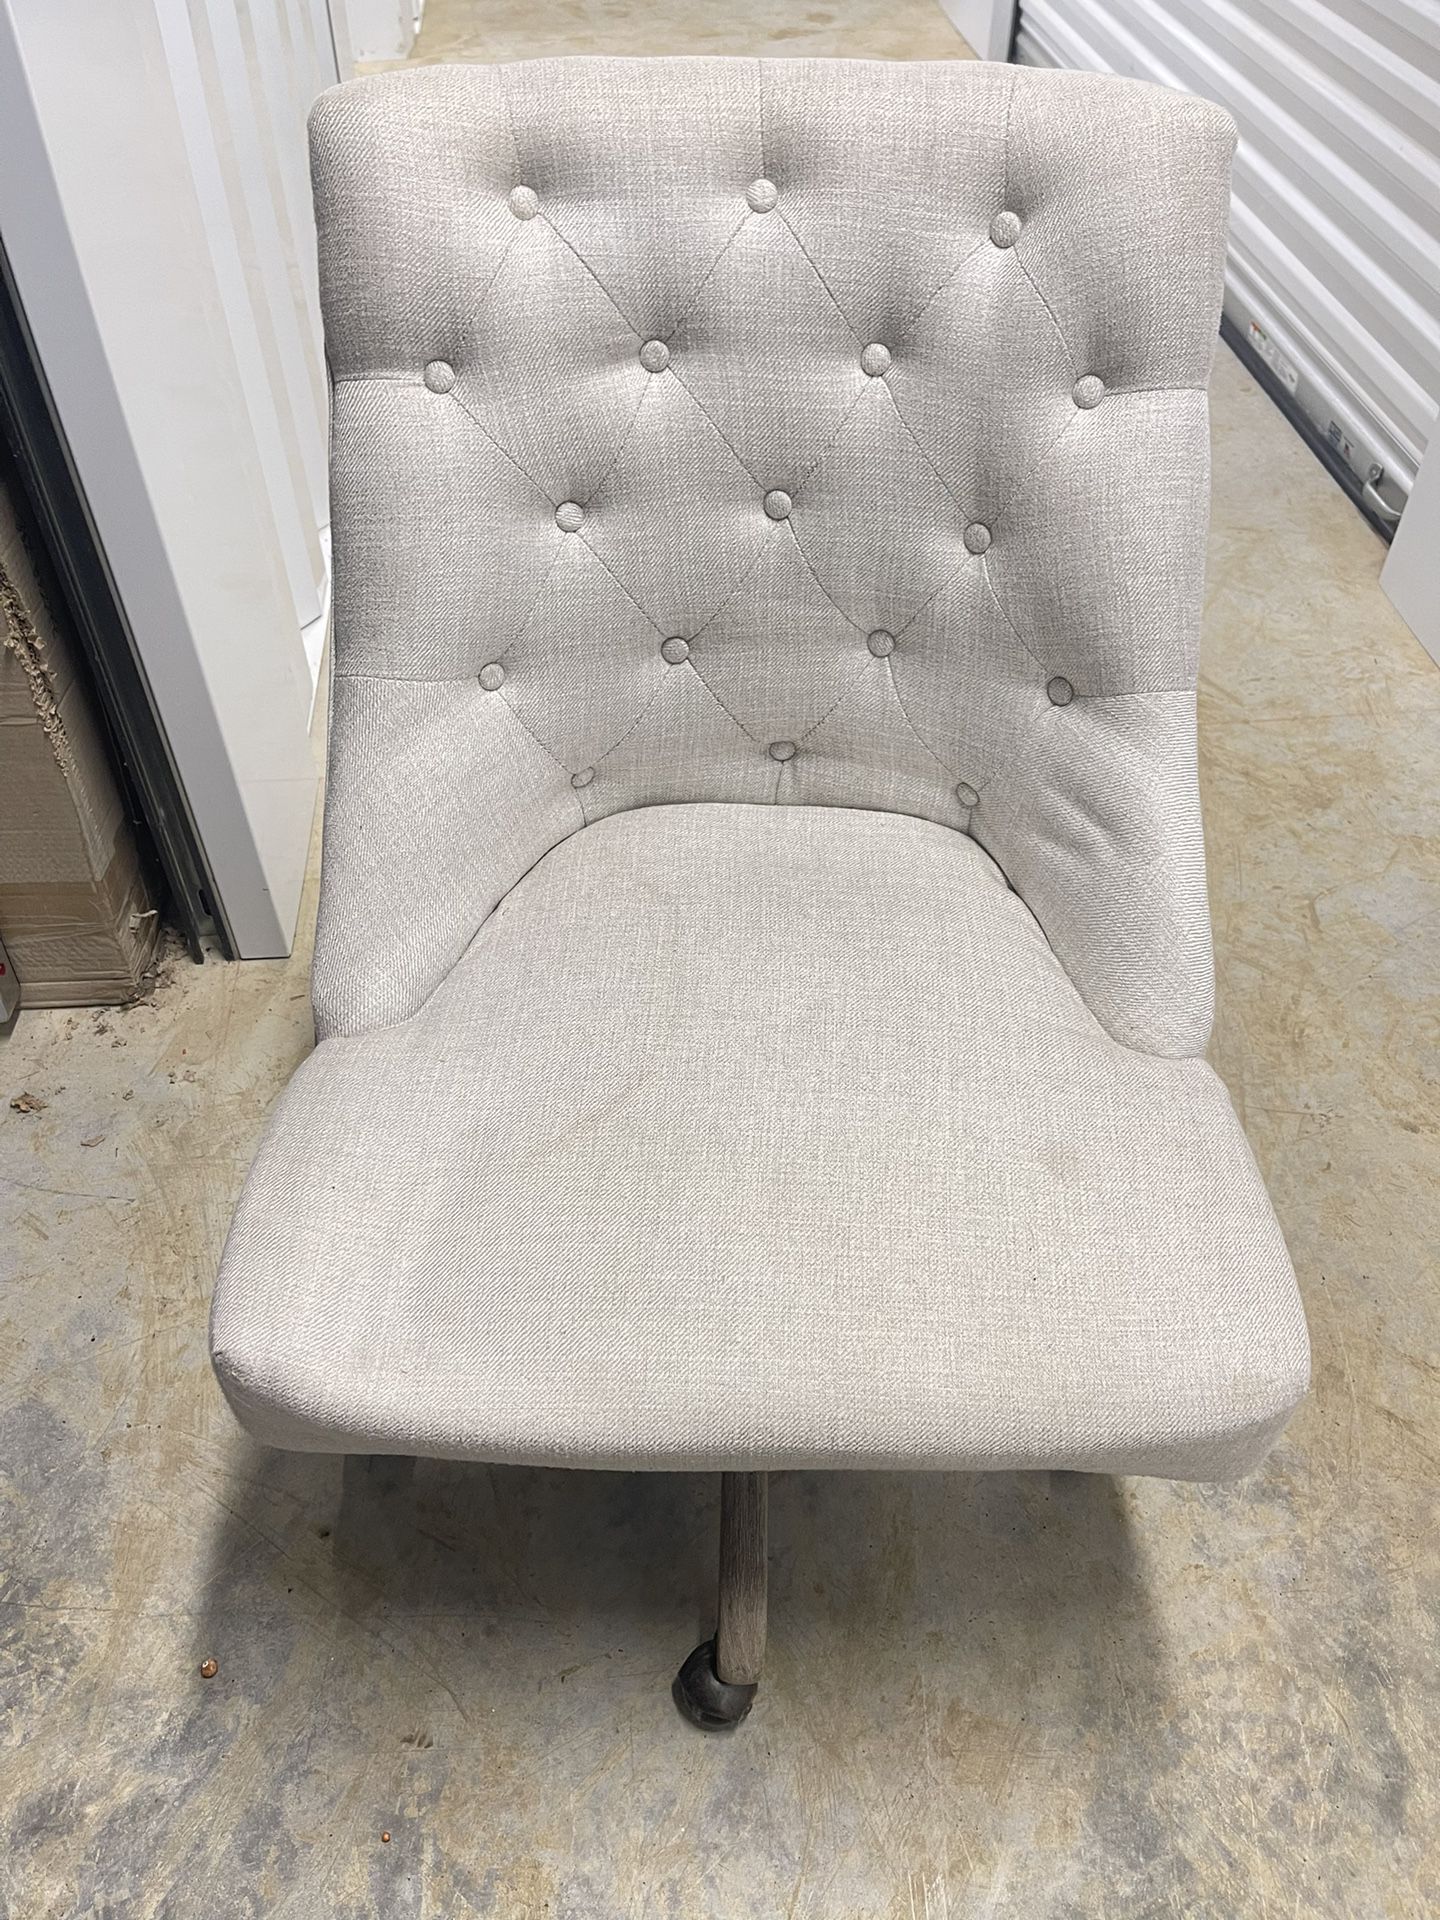 Tufted Fabric Office Chair